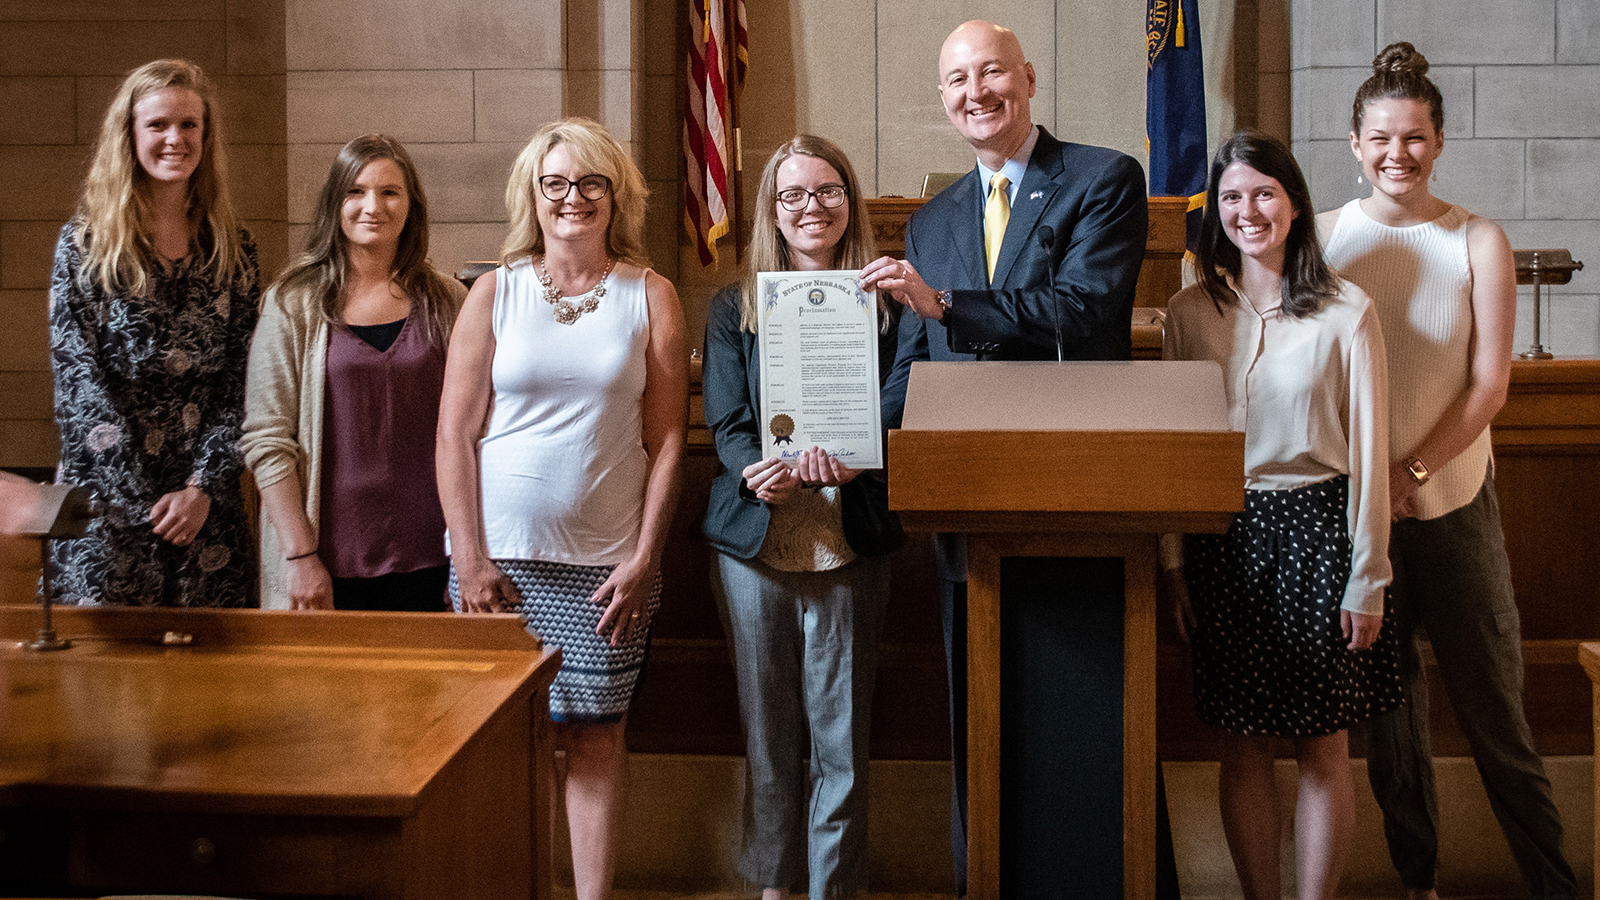 June 2019 Aphasia Awareness Month proclamation